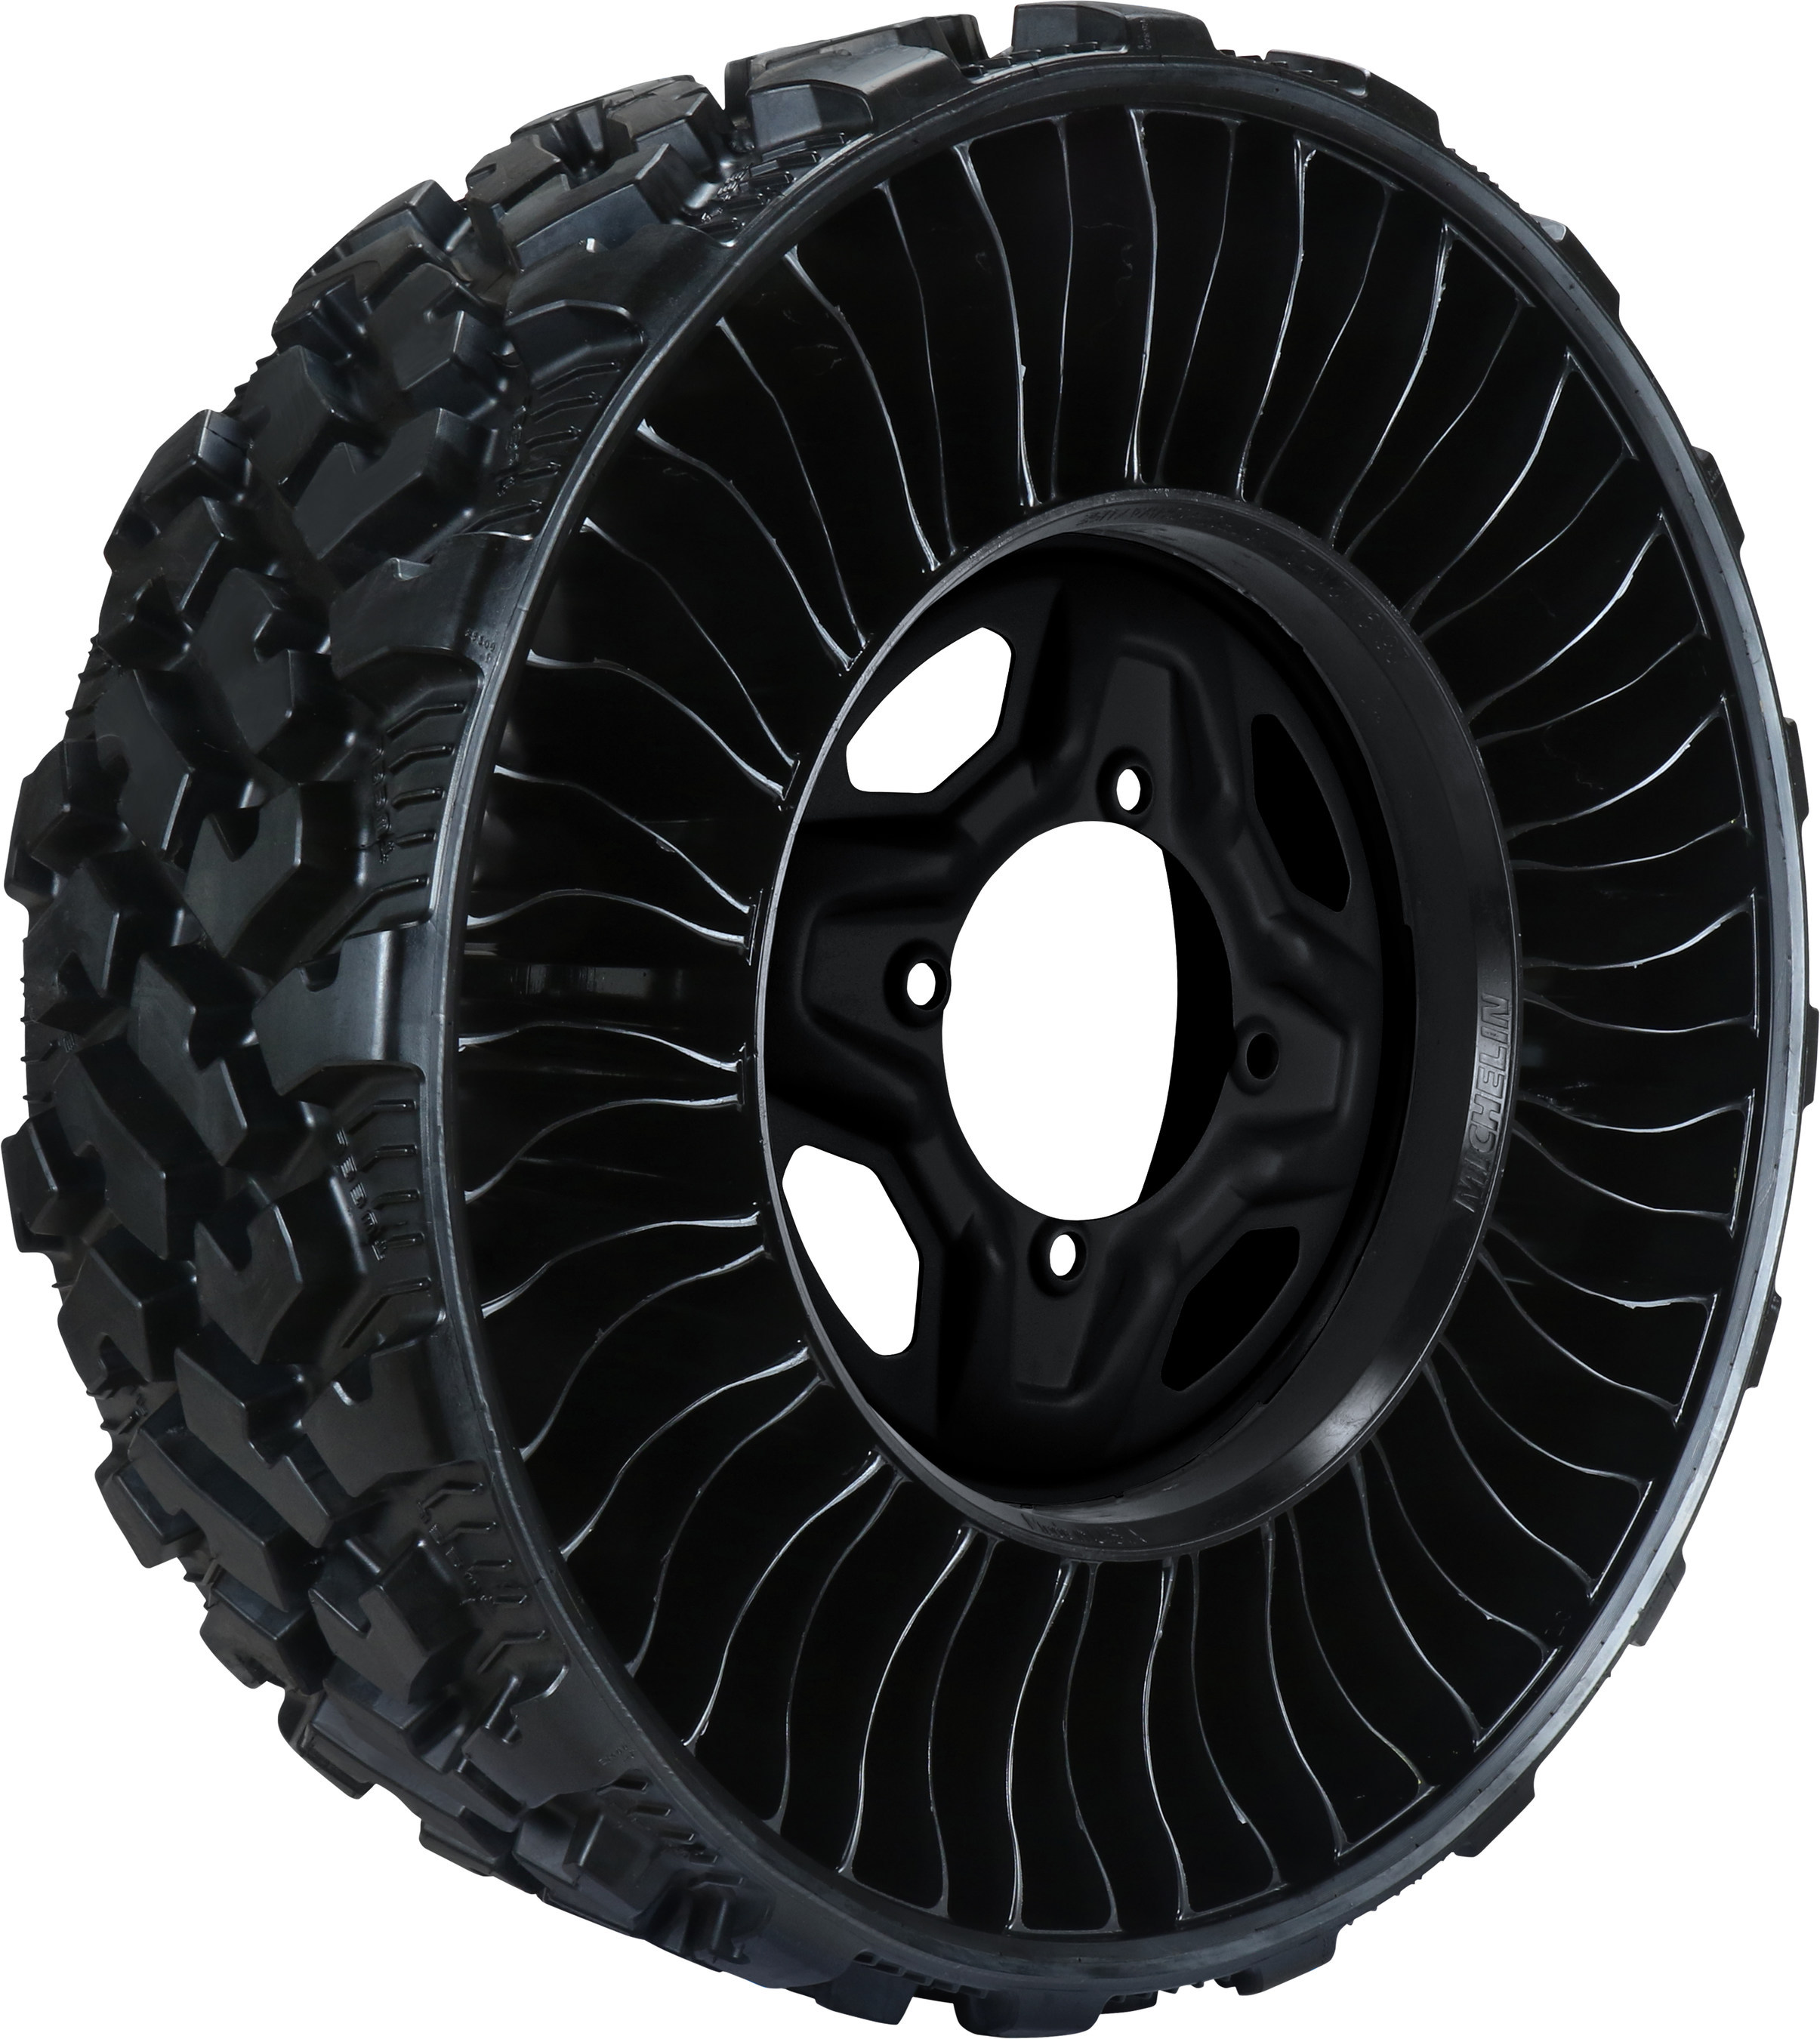 the-michelin-tweel-airless-tire-is-now-available-for-utvs